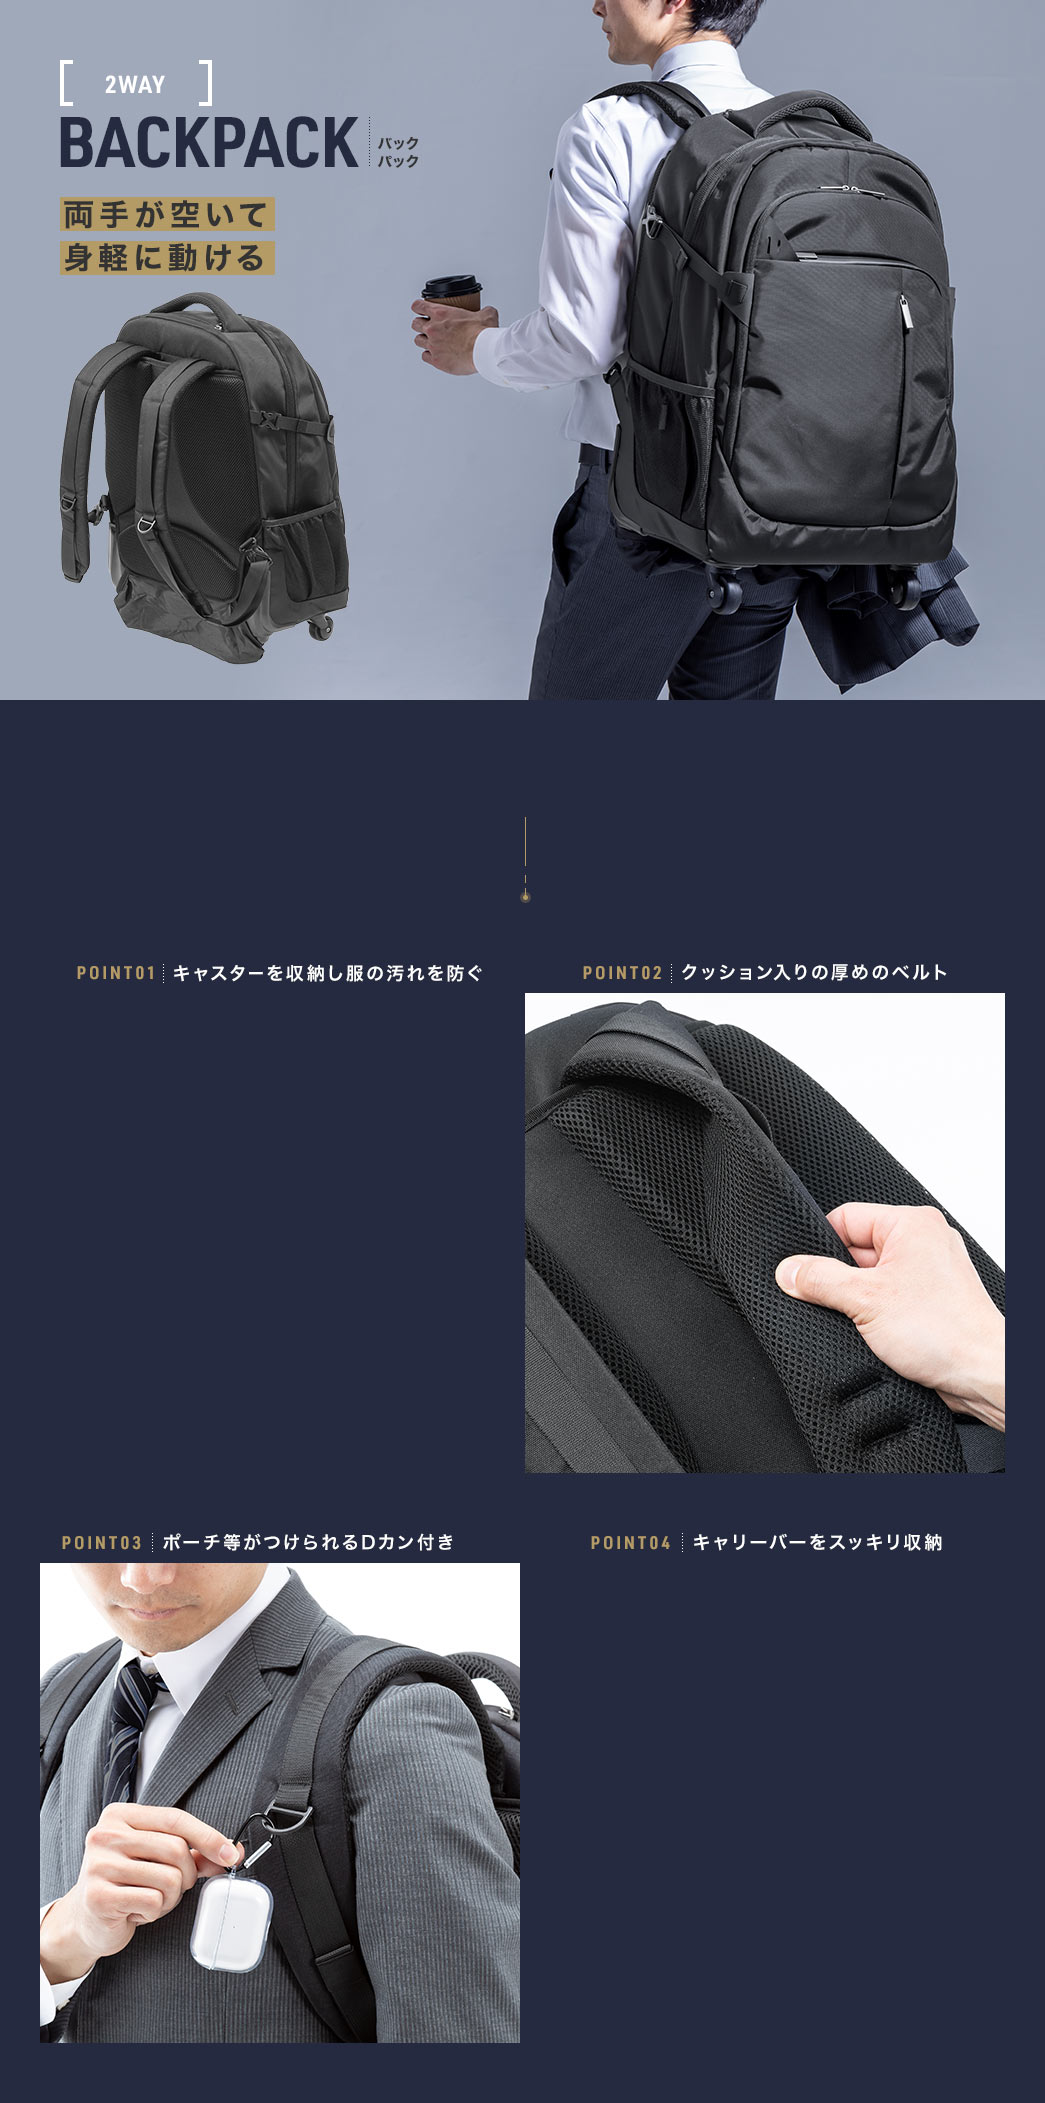 BACKPACK 両手が空いて身軽に動ける